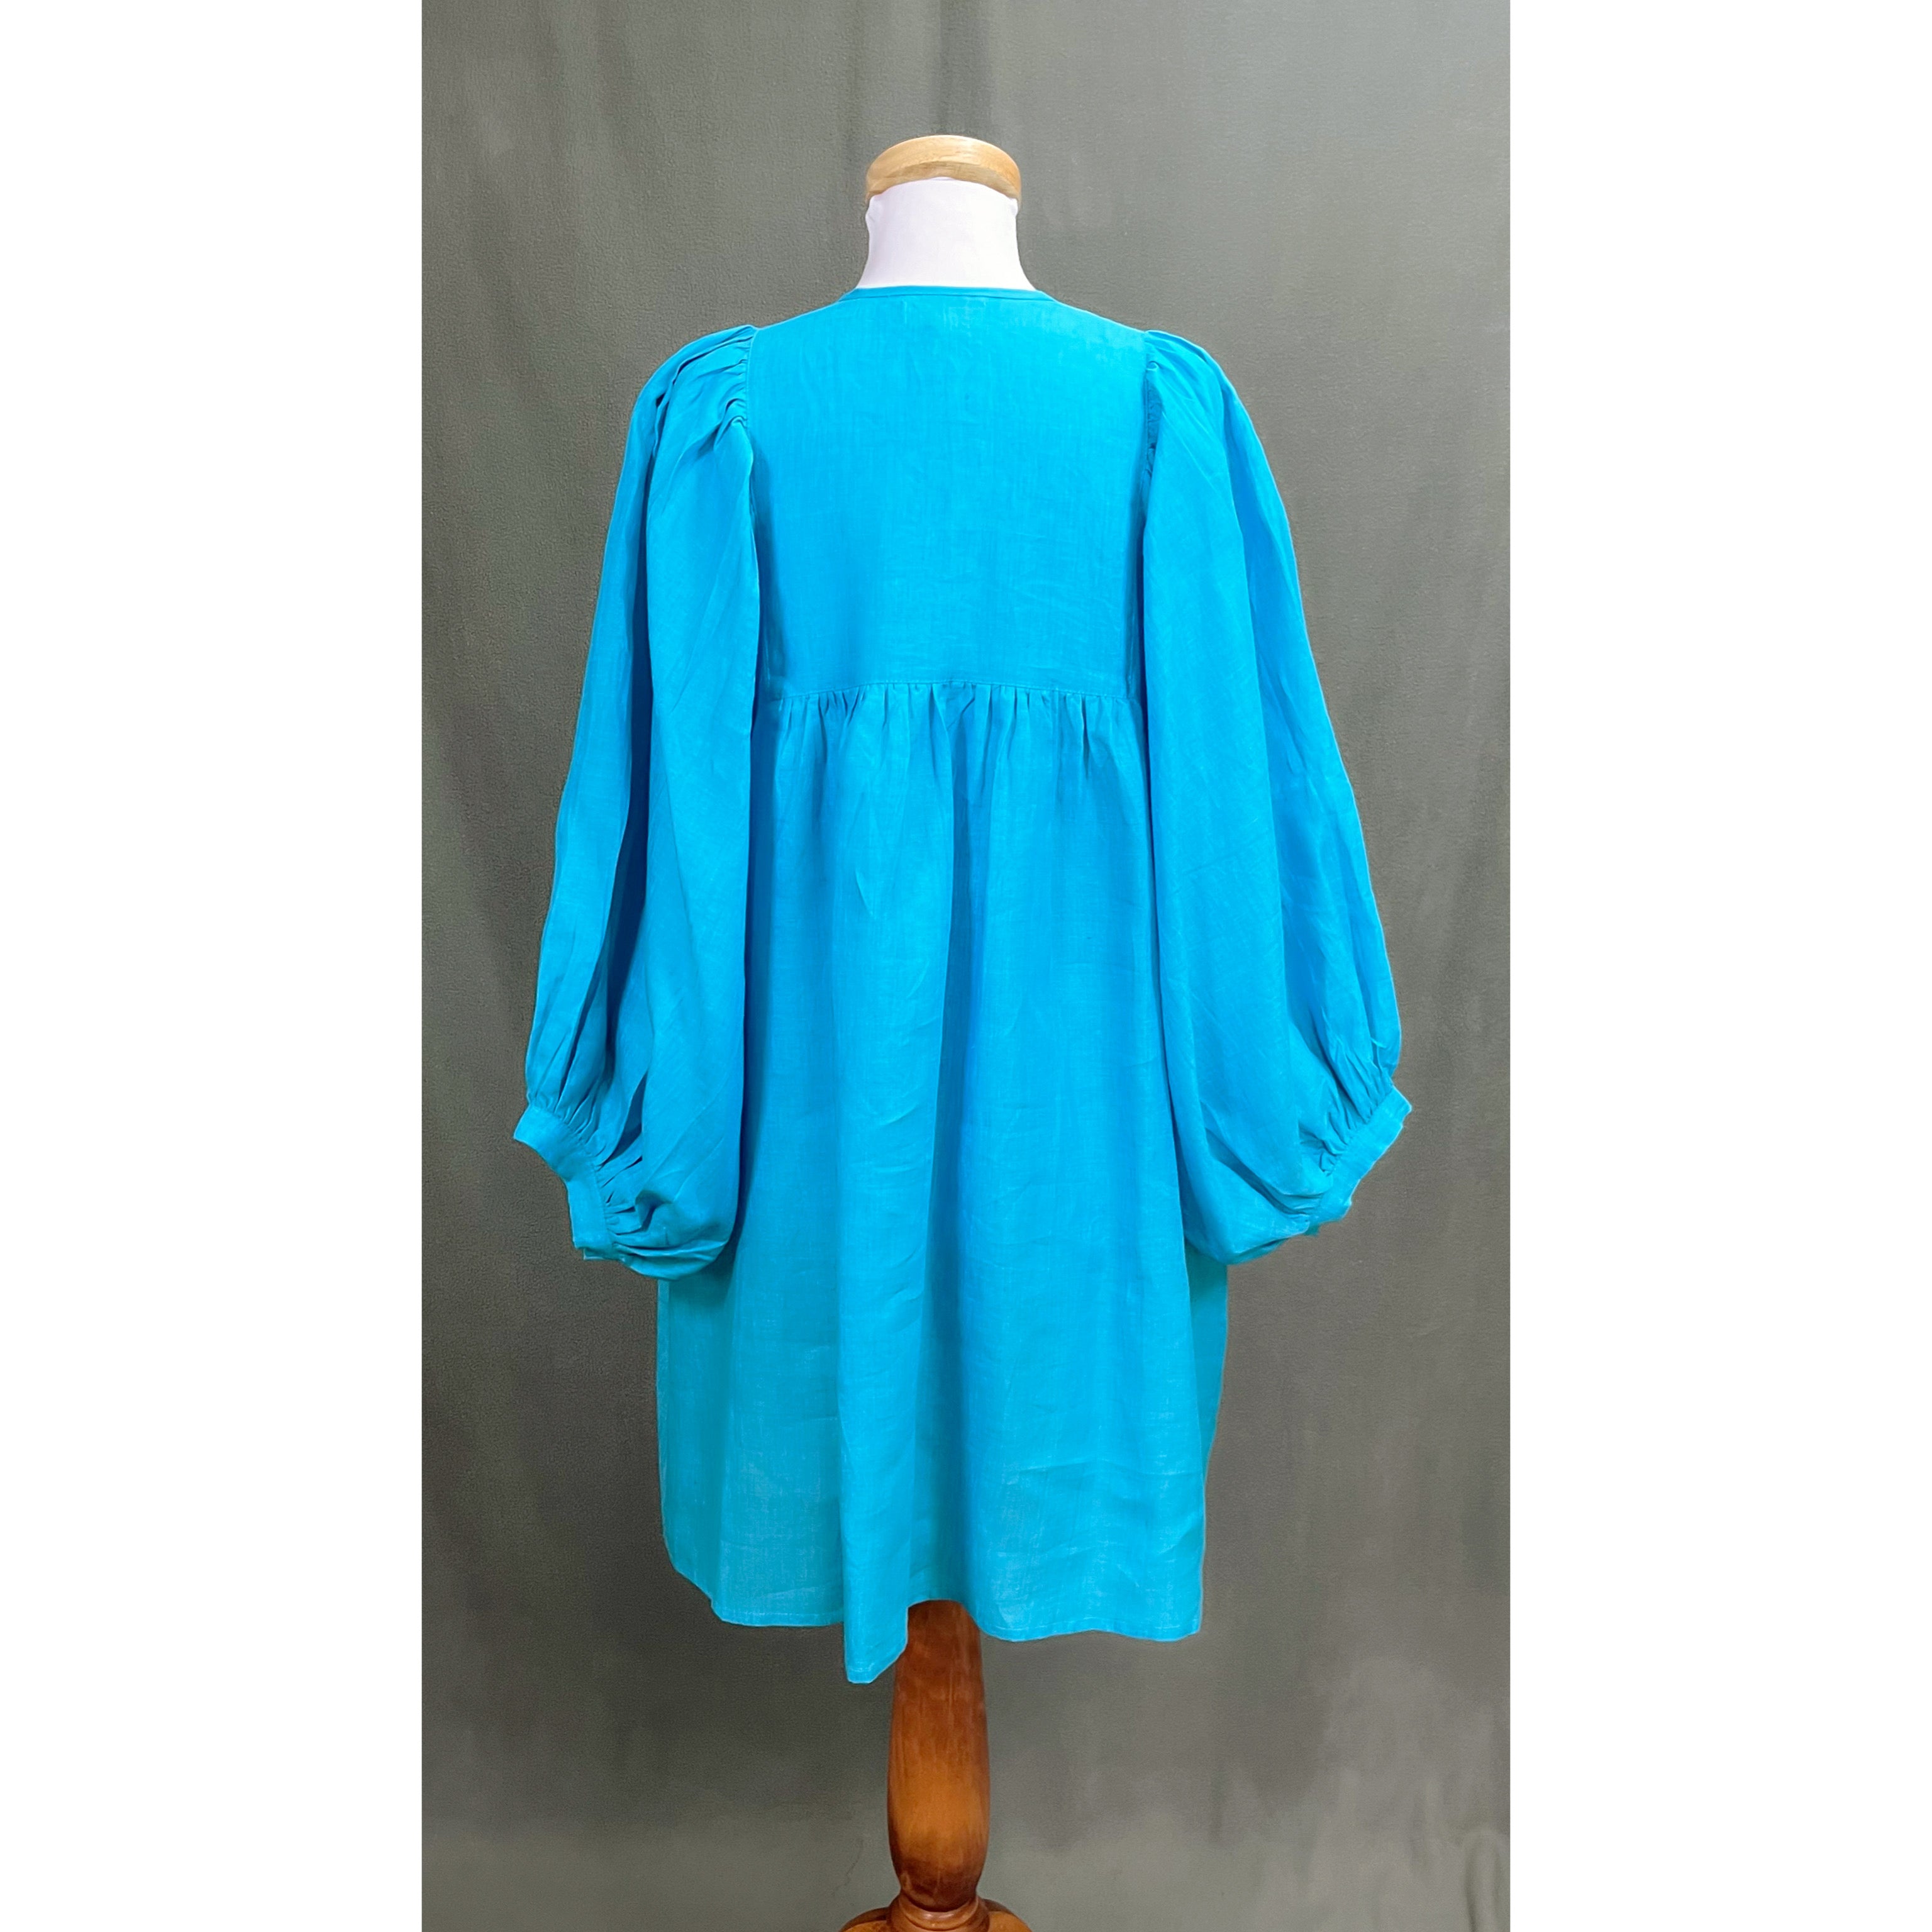 Mille turquoise linen Daisy dress, size L, NEW WITH TAGS!